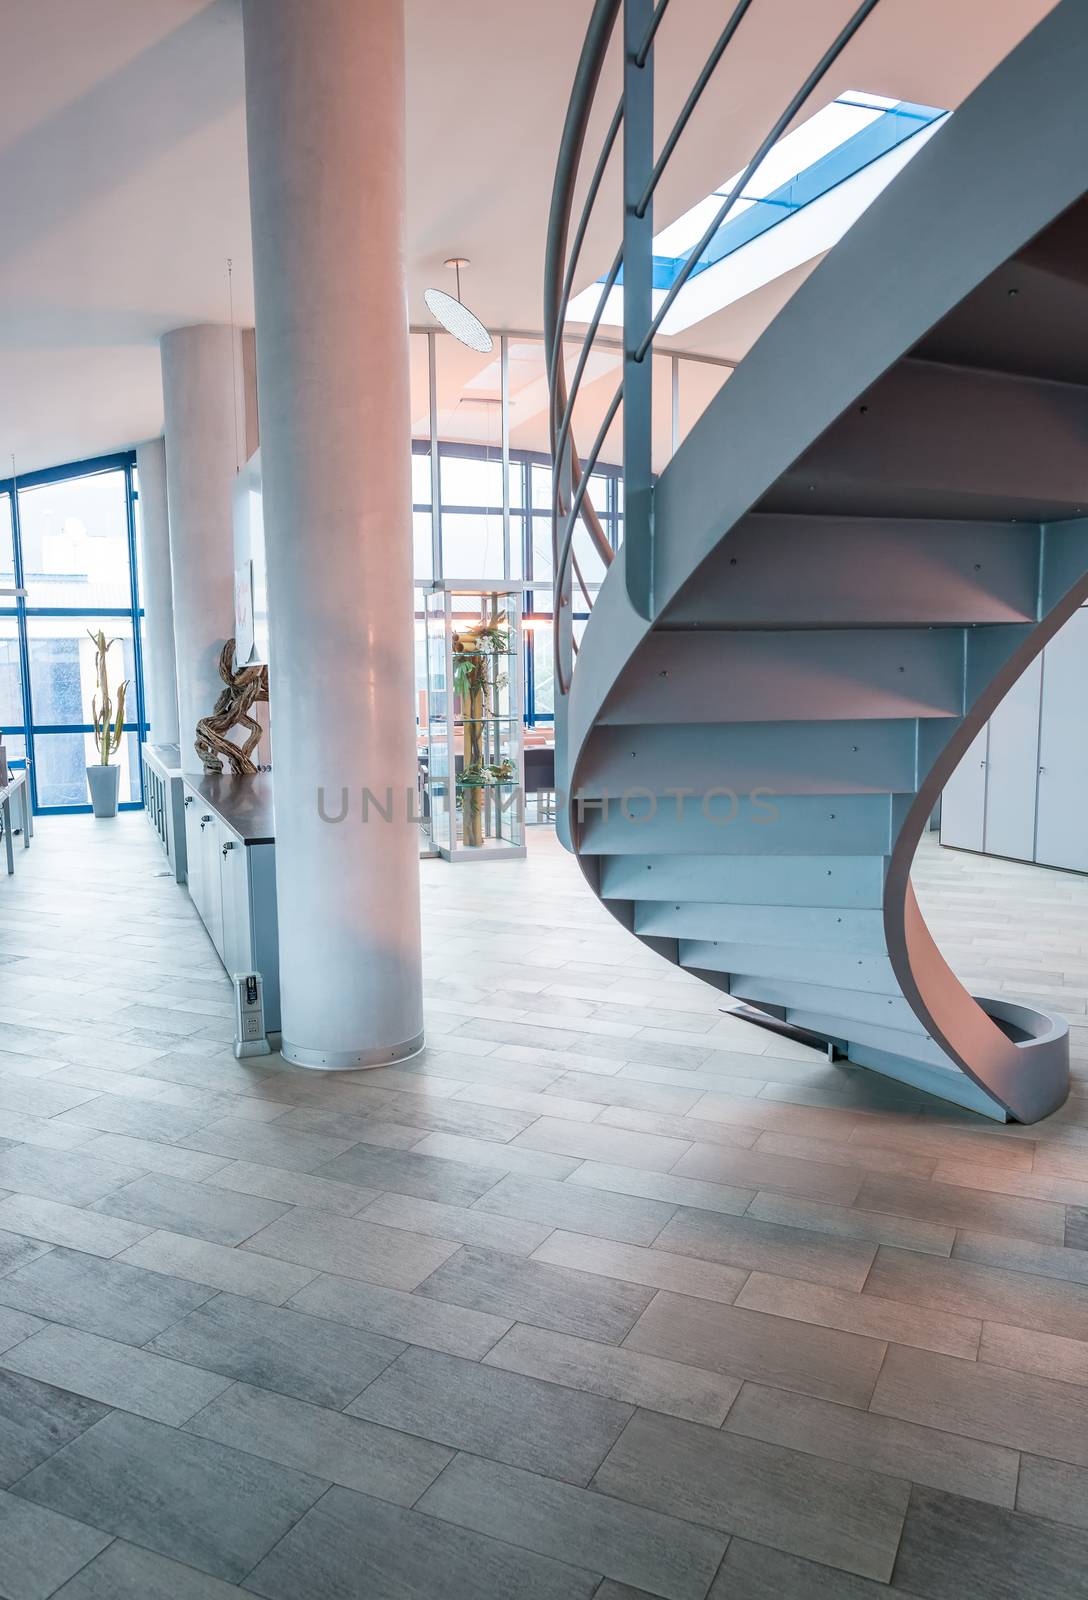 Circular stairs in modern office.